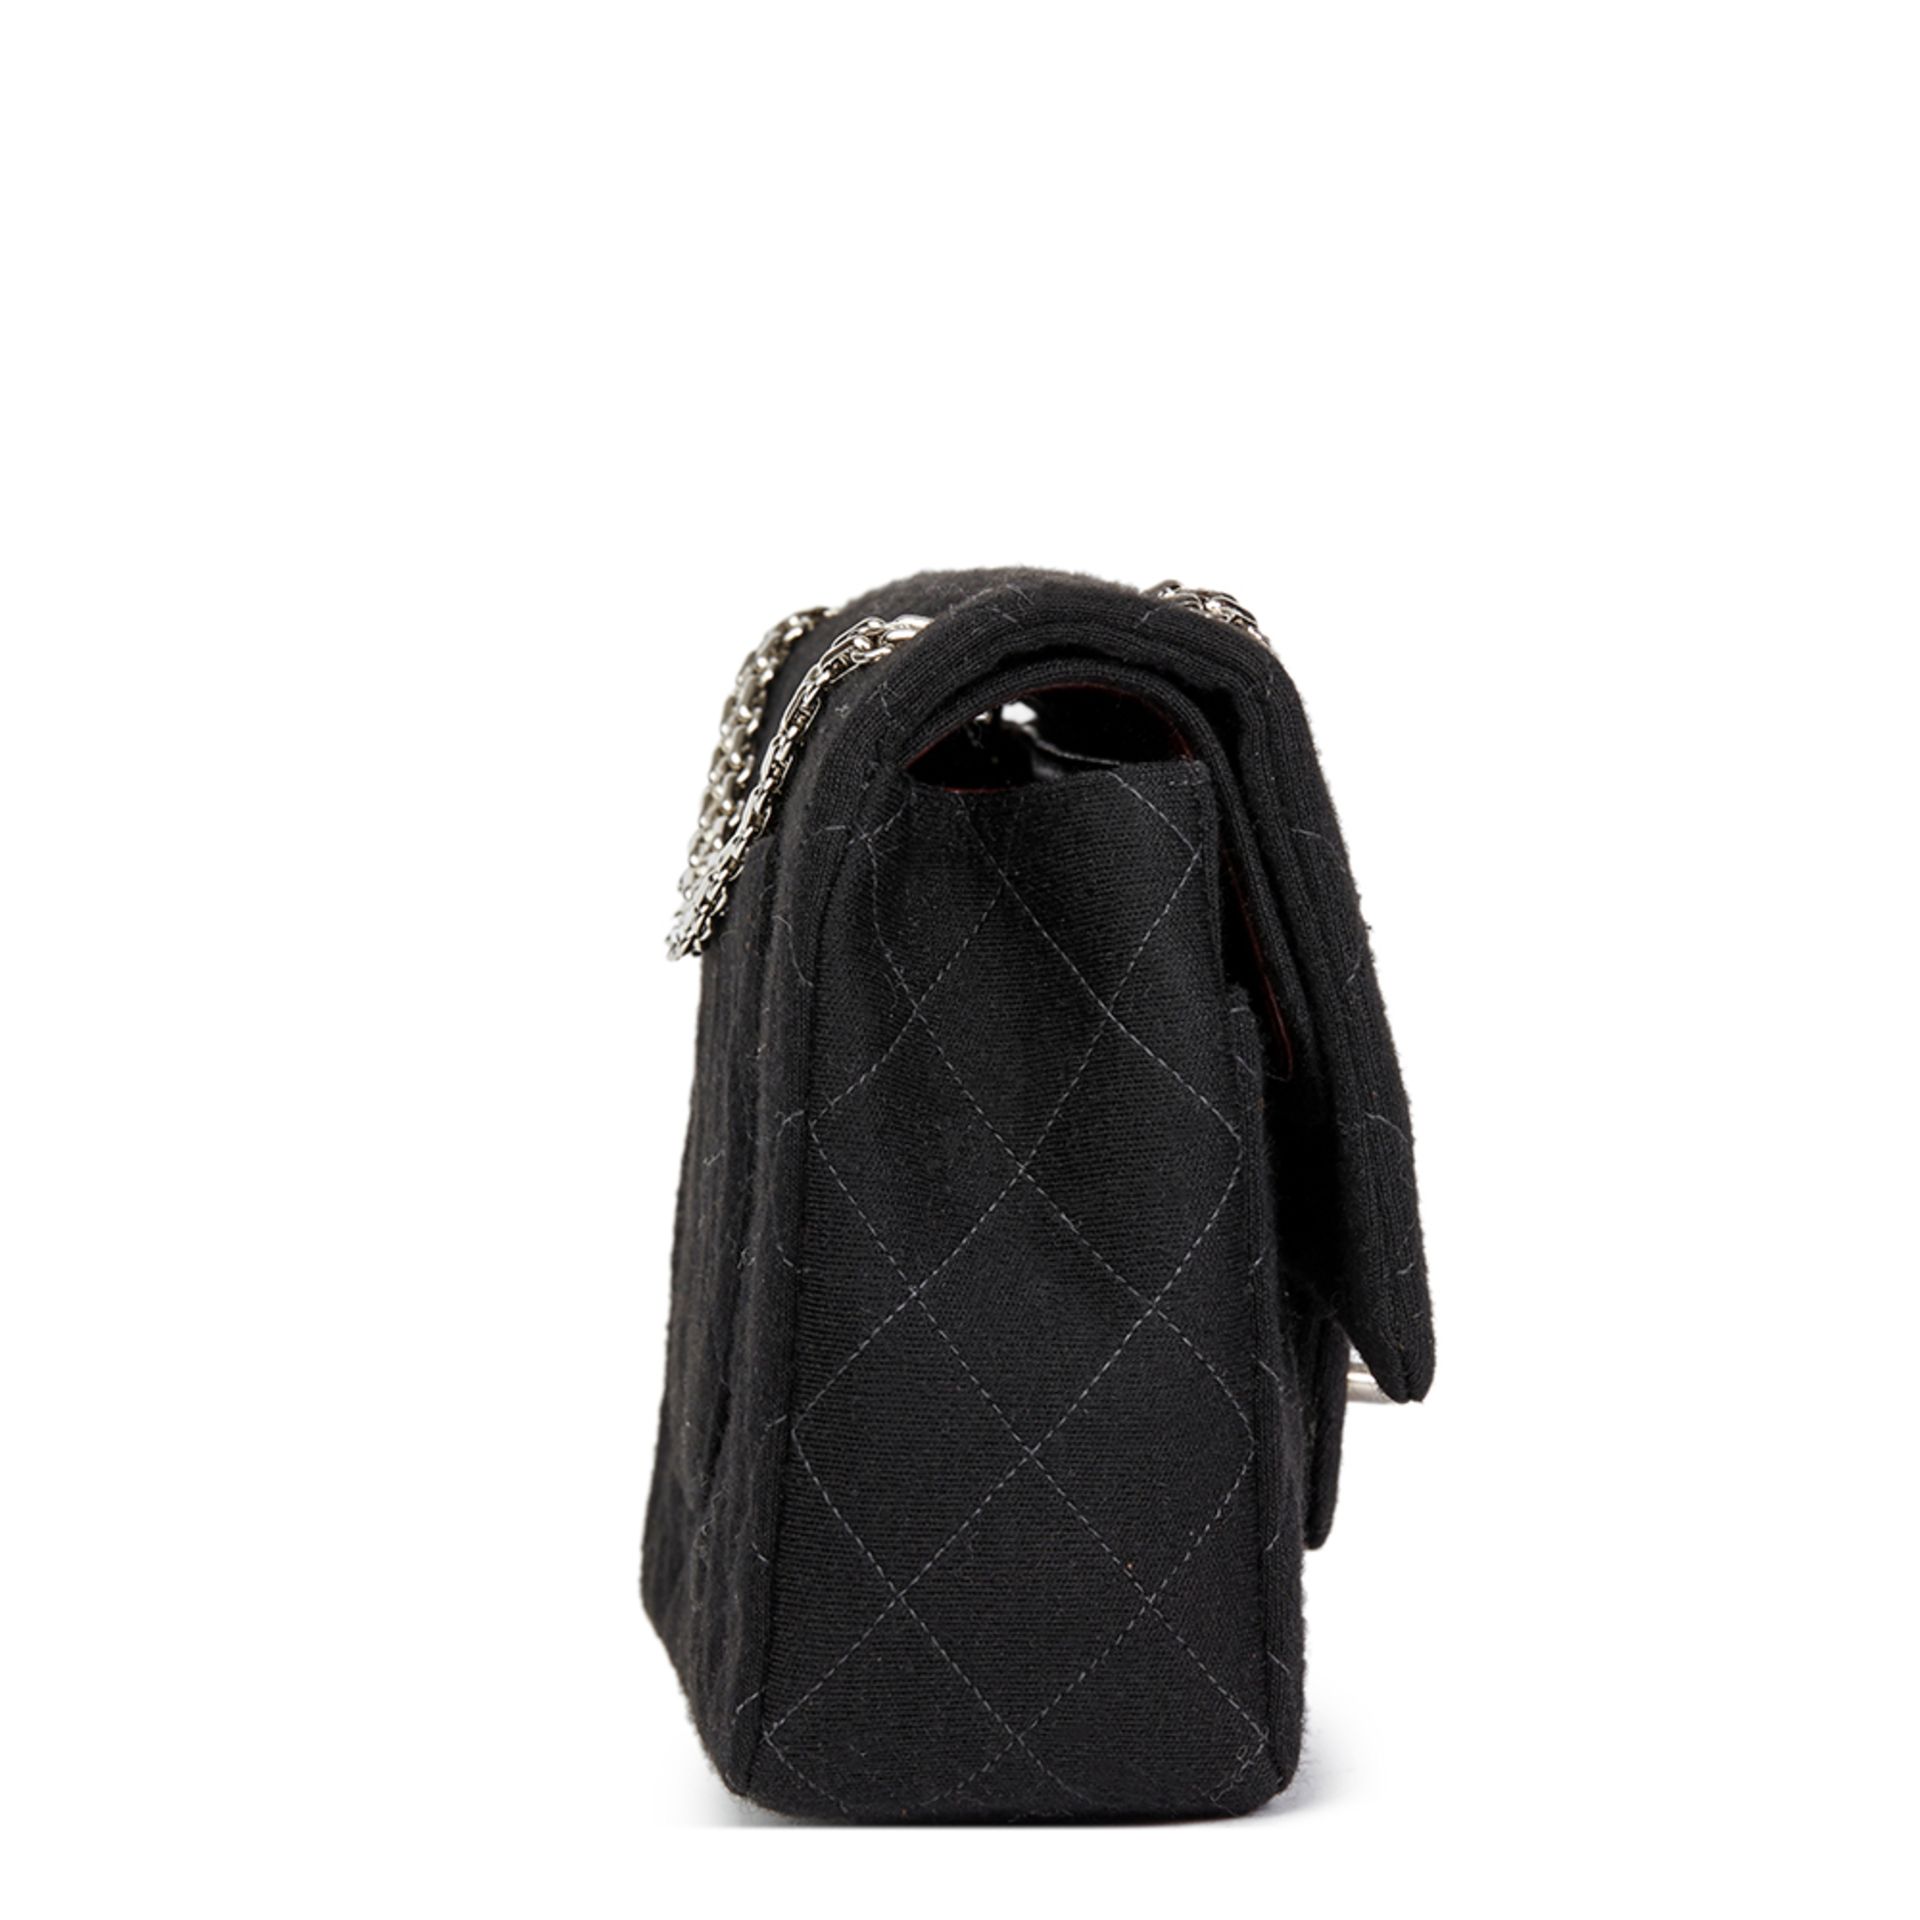 Black Quilted Jersey Fabric Vintage Medium Classic Double Flap Bag - Image 12 of 13